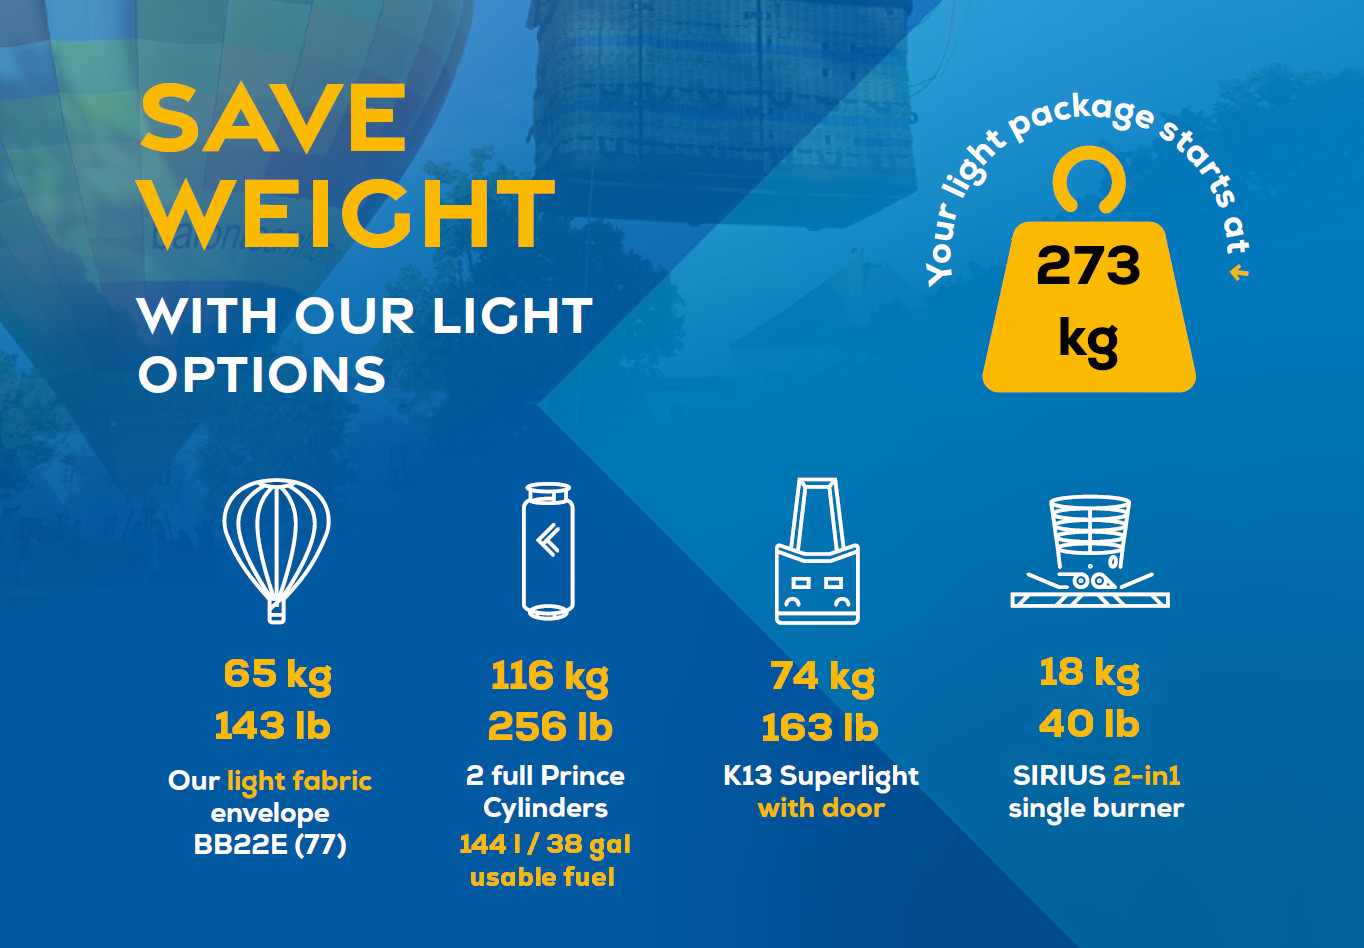 Want to save weight? Check out our light options!